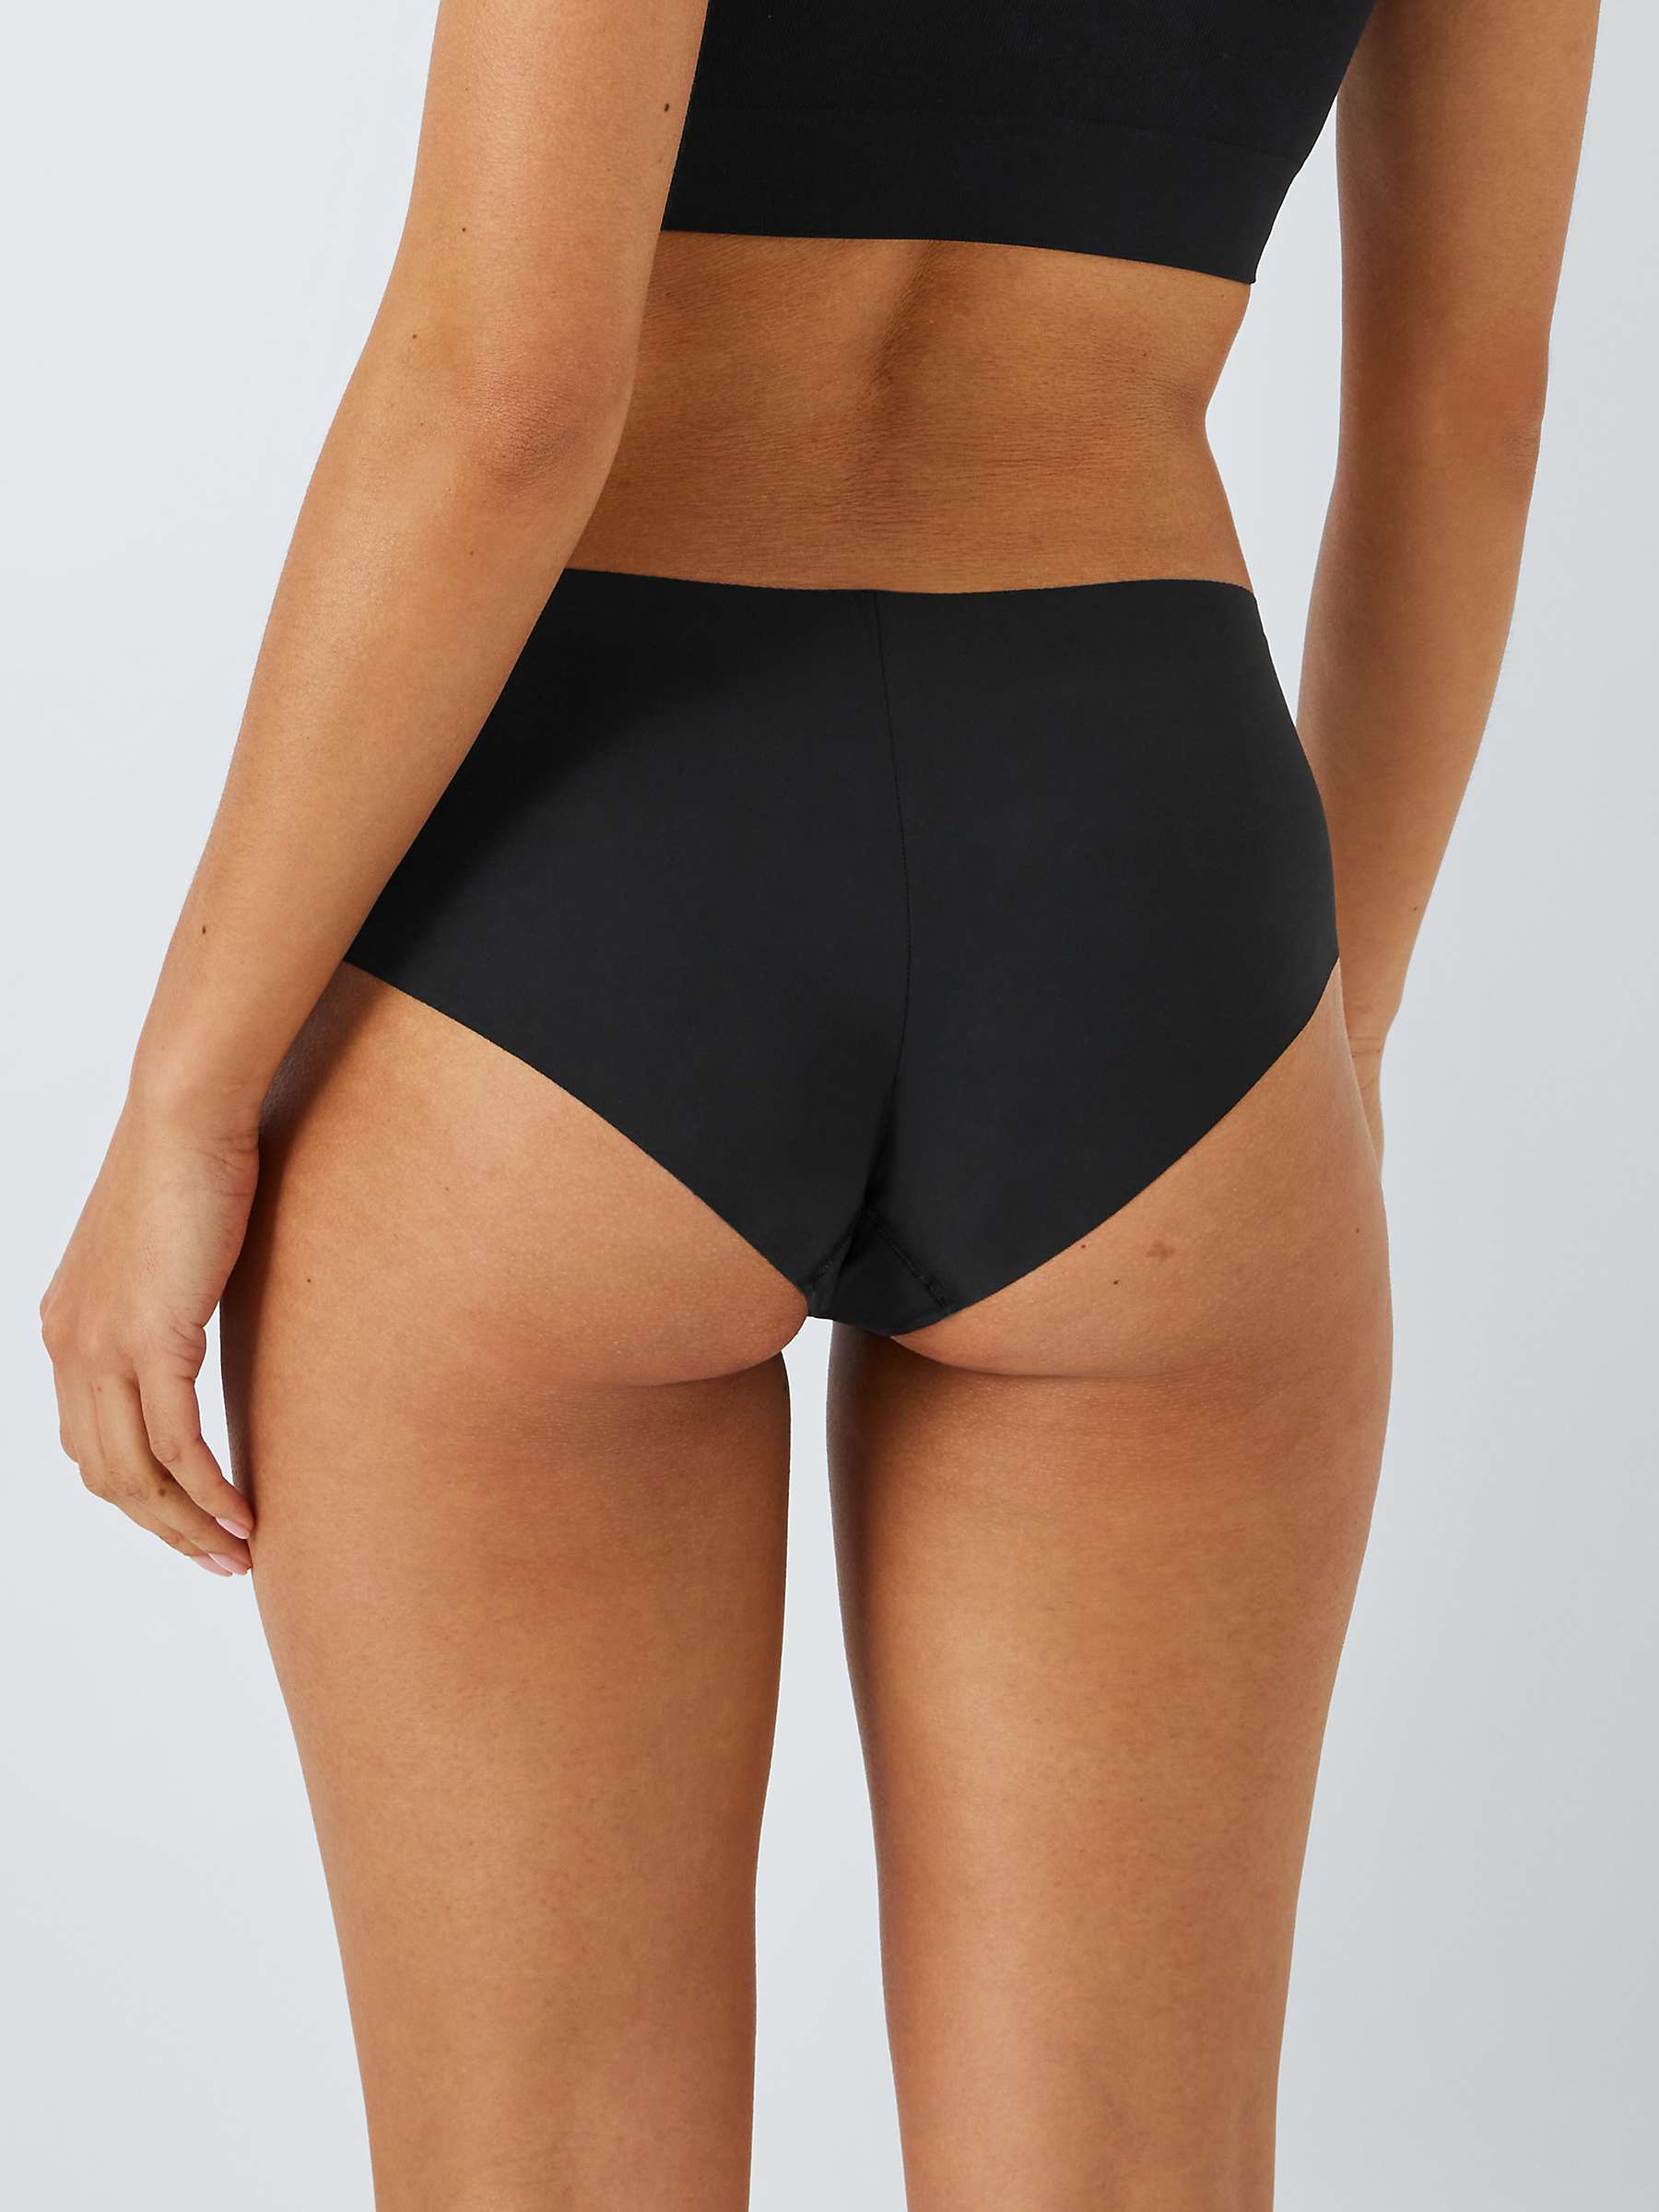 Buy John Lewis ANYDAY No VPL Short Knickers, Pack of 3 Online at johnlewis.com